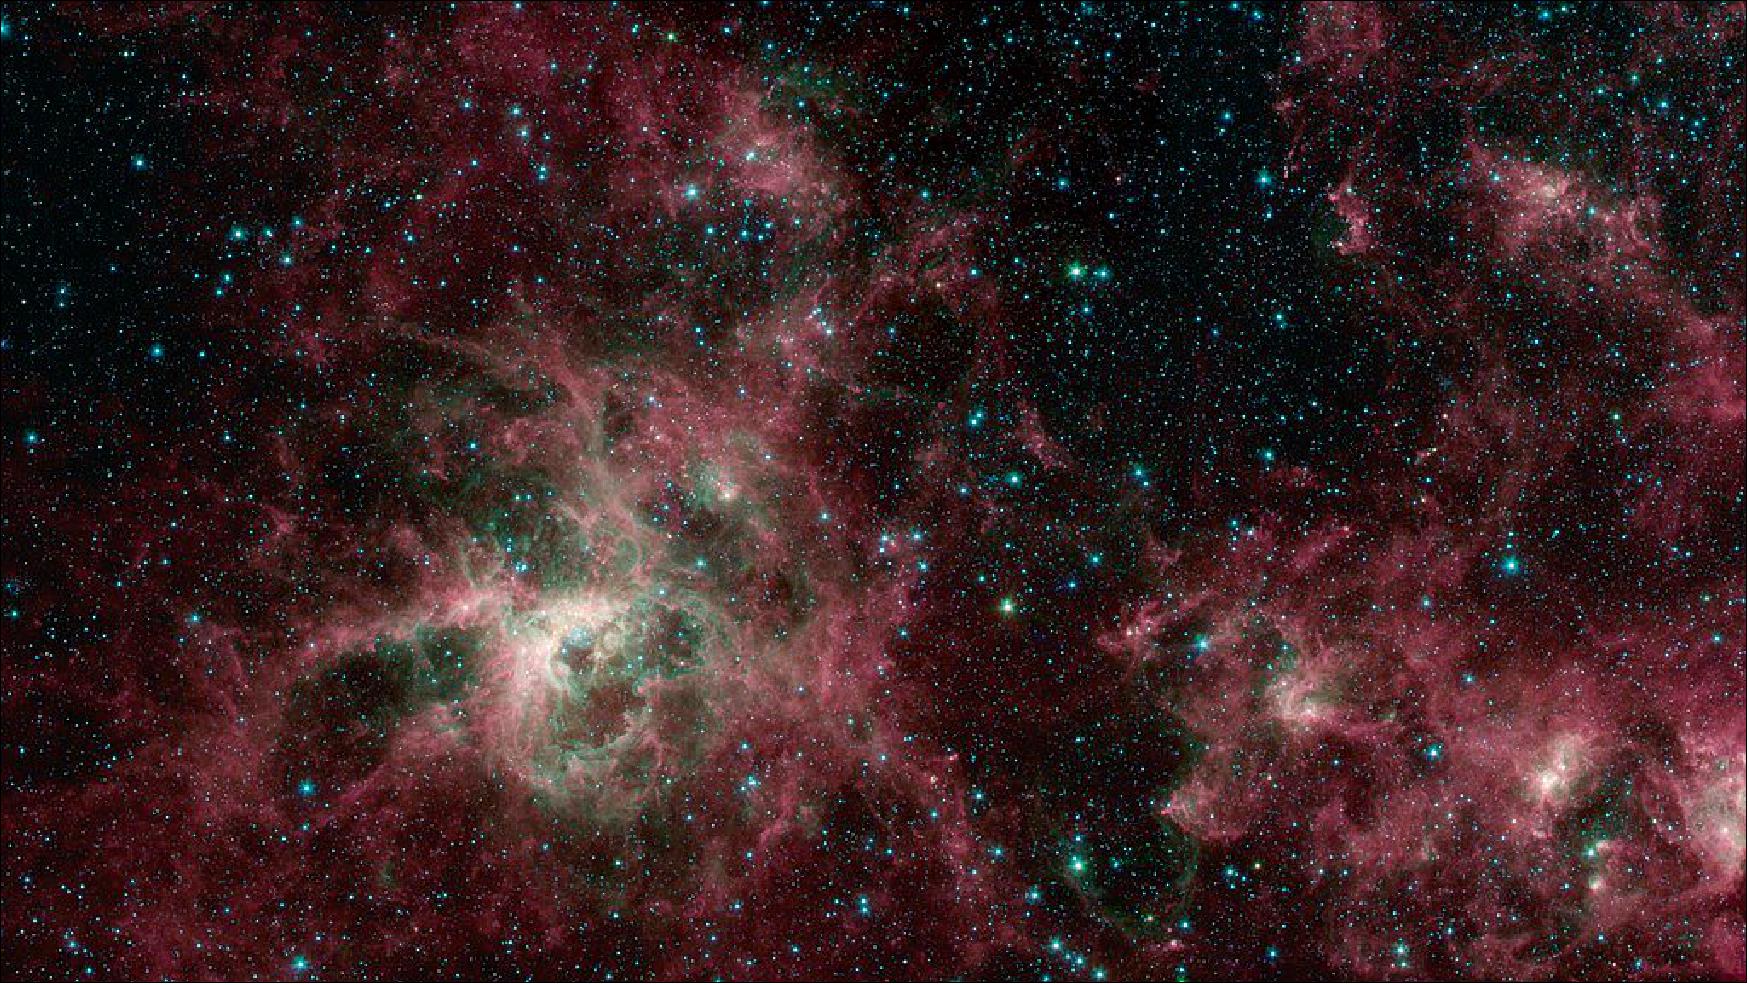 Figure 36: This image from NASA's Spitzer Space Telescope shows the Tarantula Nebula in three wavelengths of infrared light, each represented by a different color. The magenta-colored regions are dust composed of molecules called polycyclic aromatic hydrocarbons (PAHs), which are also found in ash from coal, wood and oil fires on Earth. PAHs emit in multiple wavelengths. The PAHs emit in multiple wavelengths, so the magenta color is a combination of red (corresponding to an infrared wavelength of 8 µm) and blue (3.6 µm). The green color in this image shows the presence of particularly hot gas emitting infrared light at a wavelength of 4.5 µm. The stars in the image are mostly a combination of green and blue. White hues indicate regions that radiate in all three wavelengths (image credit: NASA/JPL-Caltech)